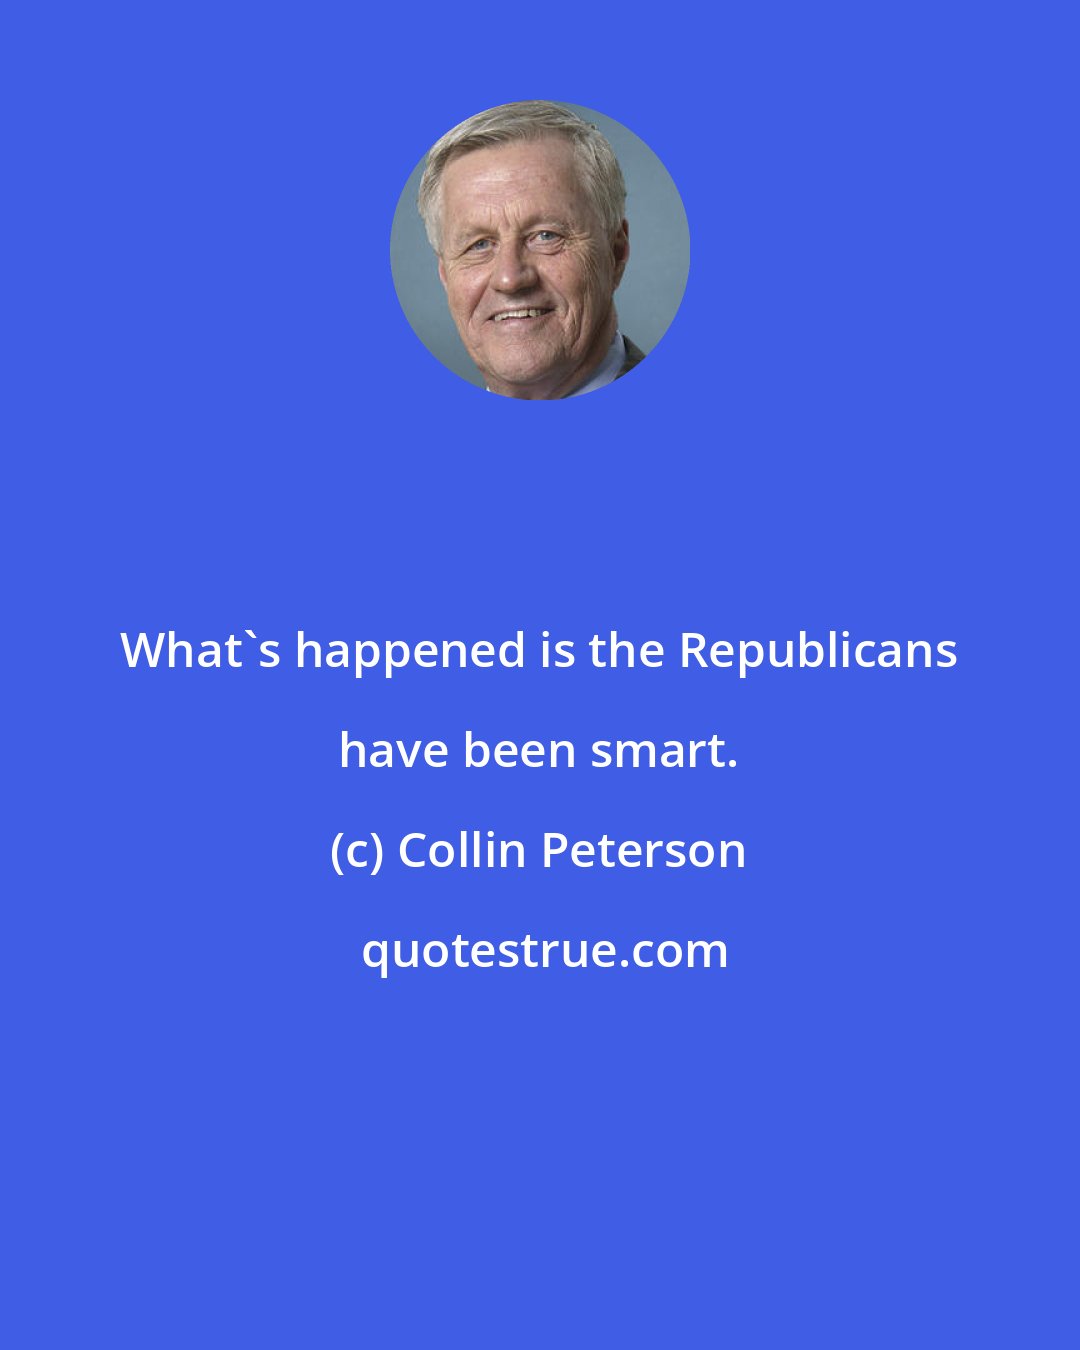 Collin Peterson: What's happened is the Republicans have been smart.